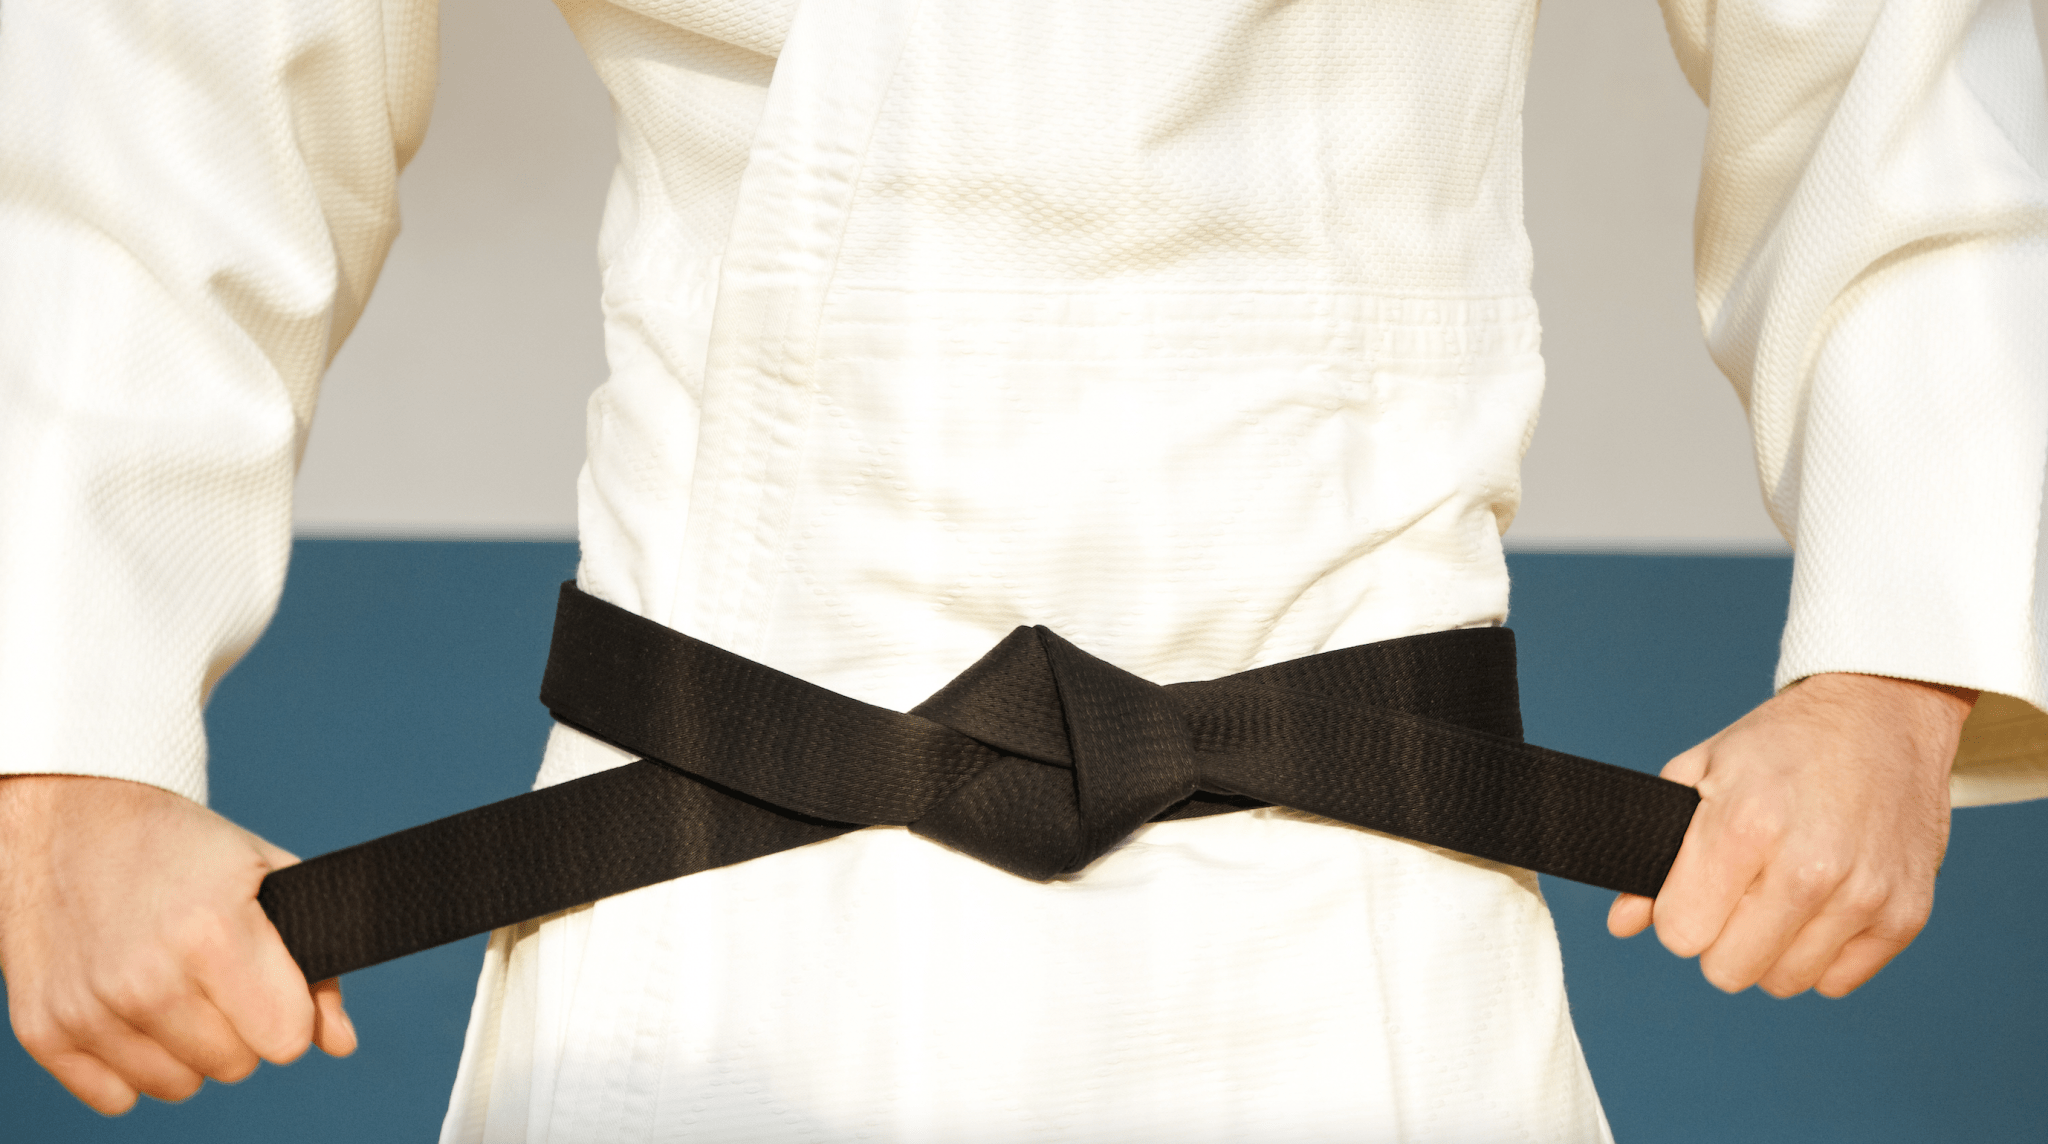 How to Tie a Taekwondo Belt (Step-by-Step Guide)